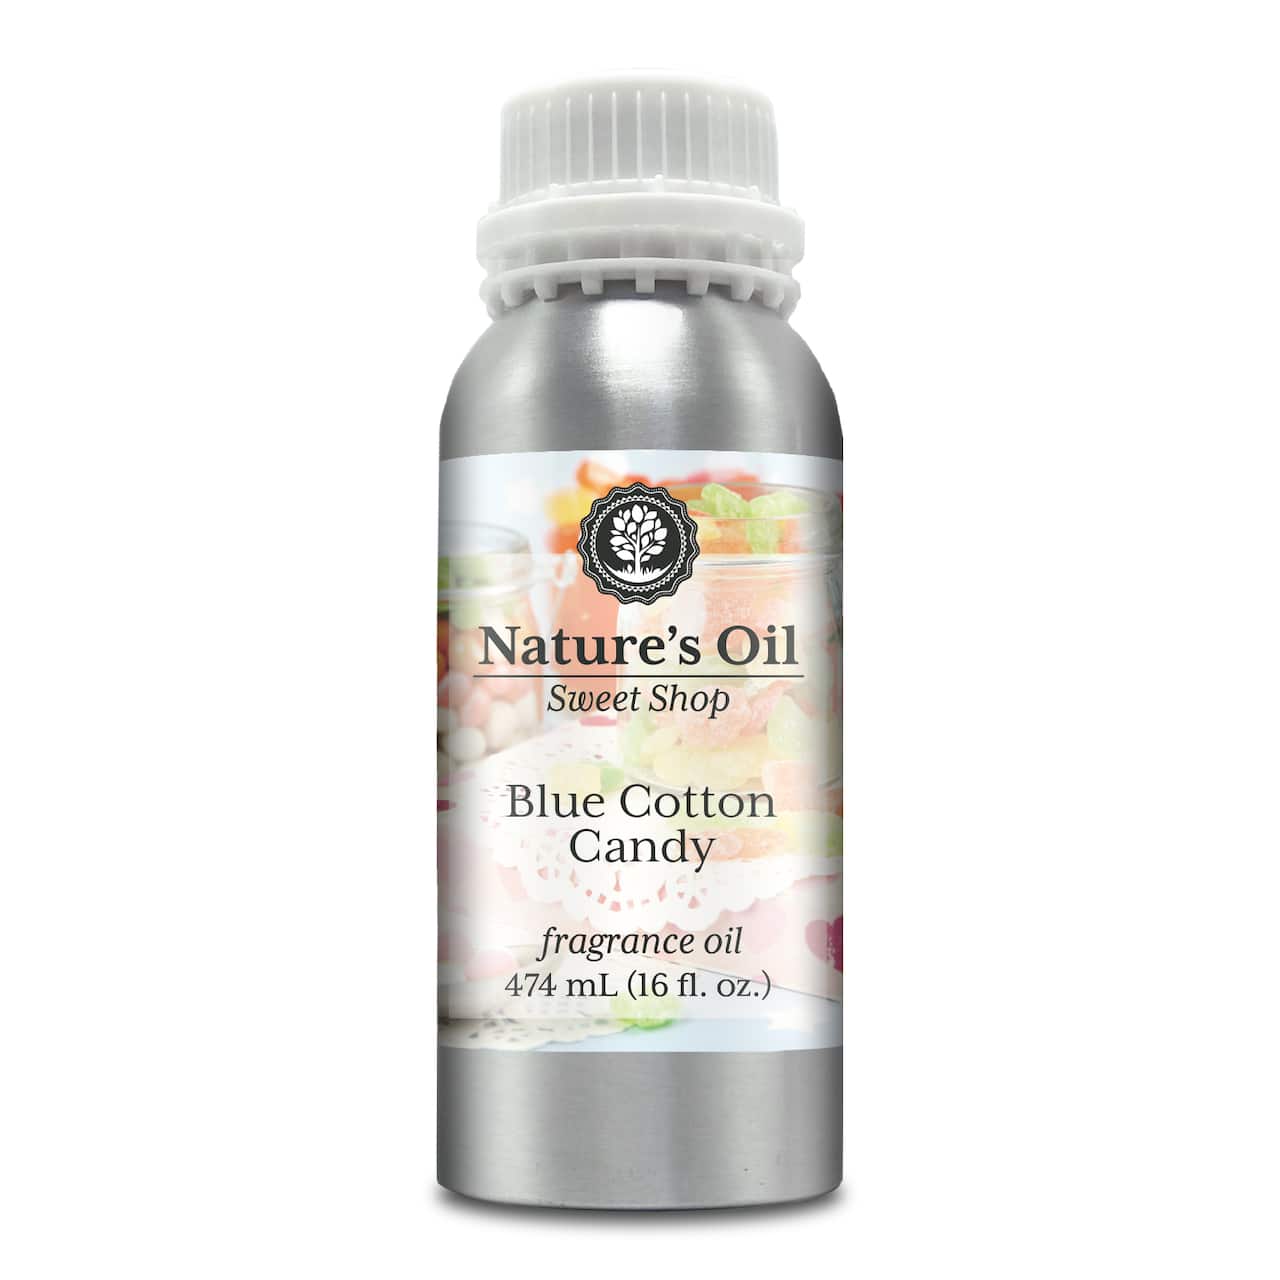 Nature's Oil Blue Cotton Candy Fragrance Oil